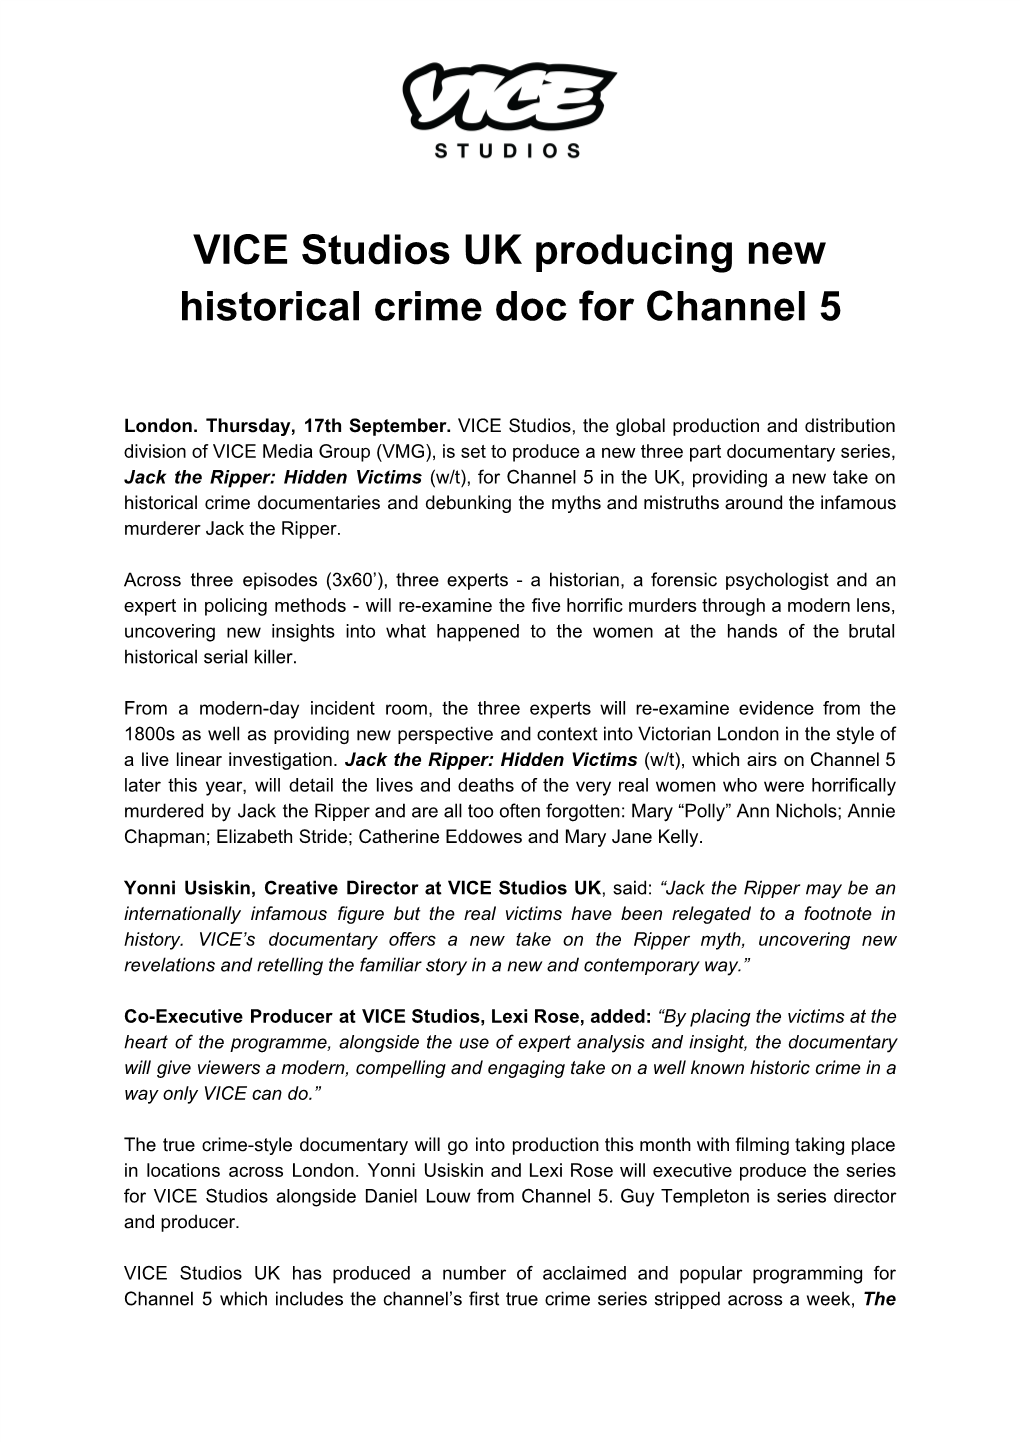 VICE Studios UK Producing New Historical Crime Doc for Channel 5